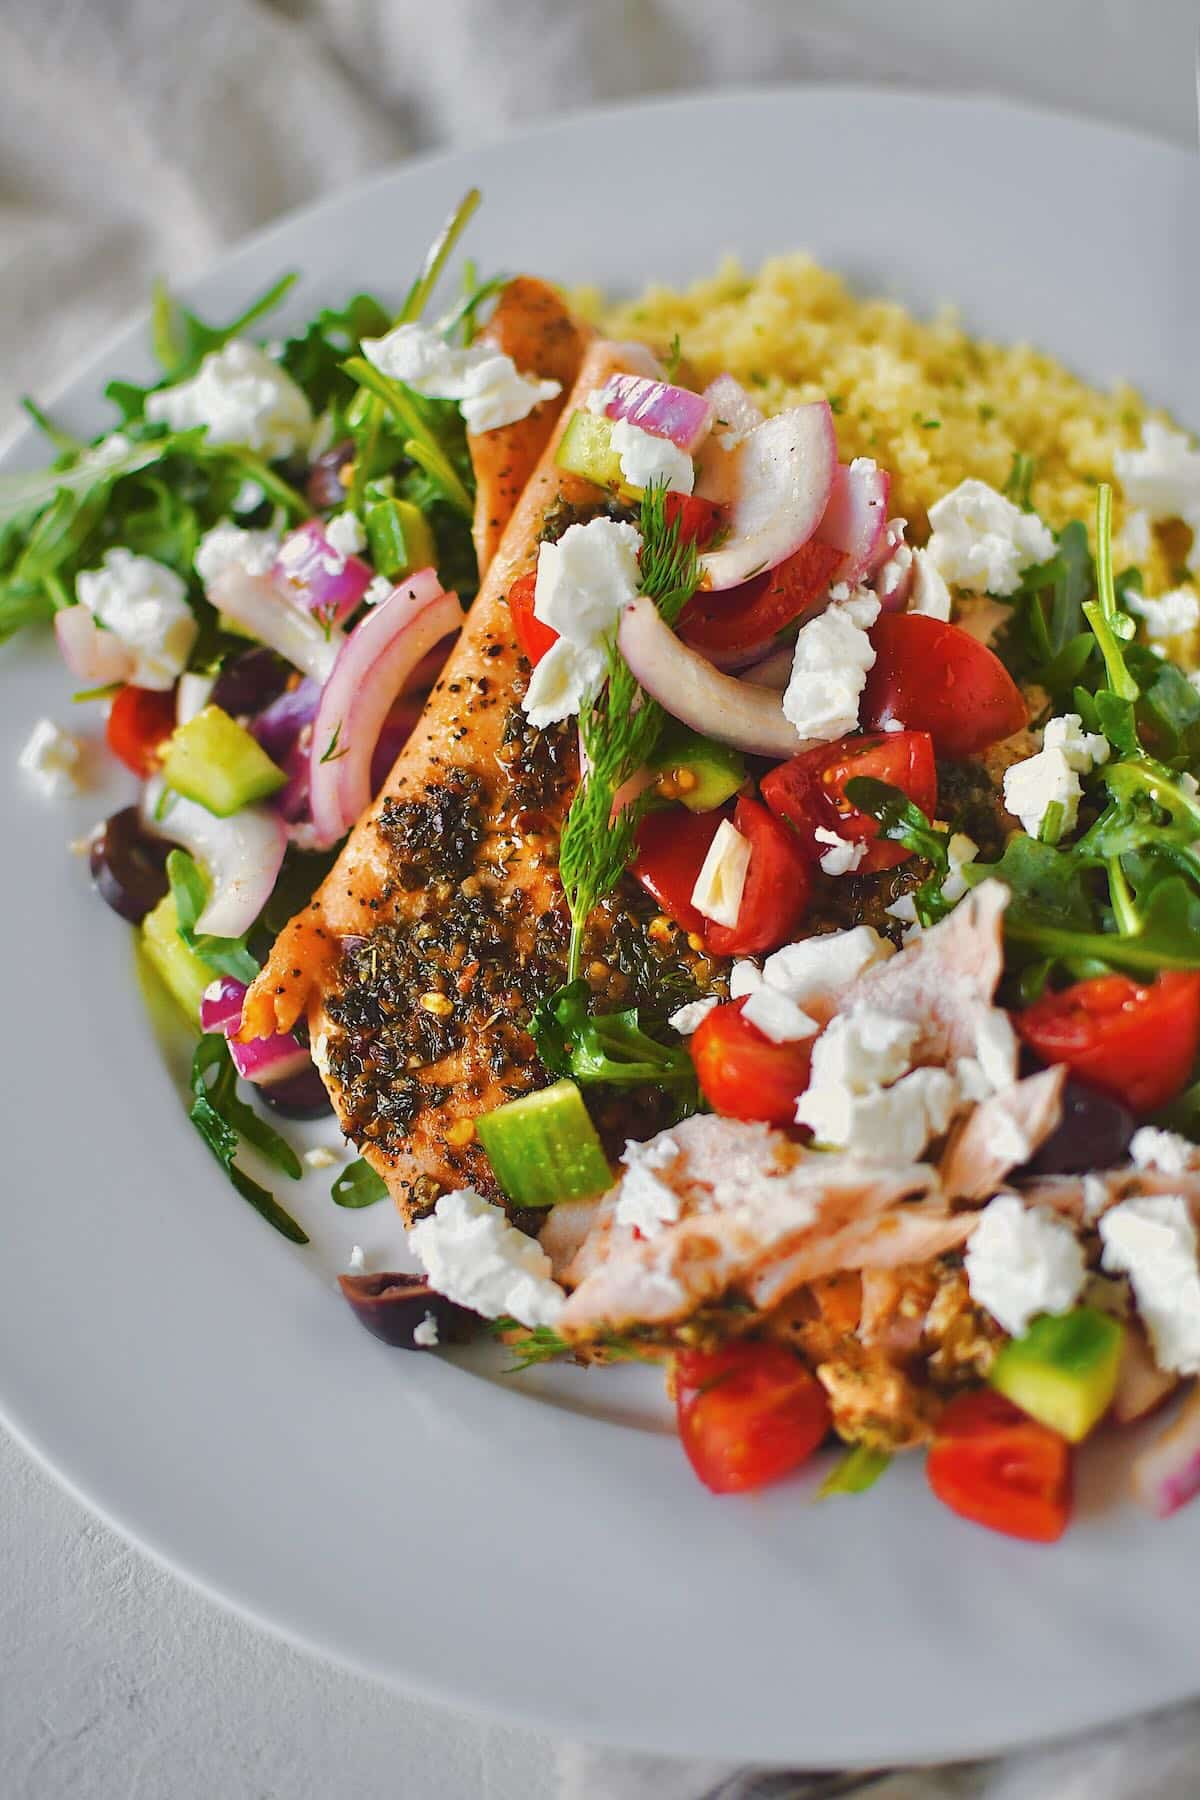 Greek Salmon topped with Greek salad topping of fresh veggies and feta cheese.